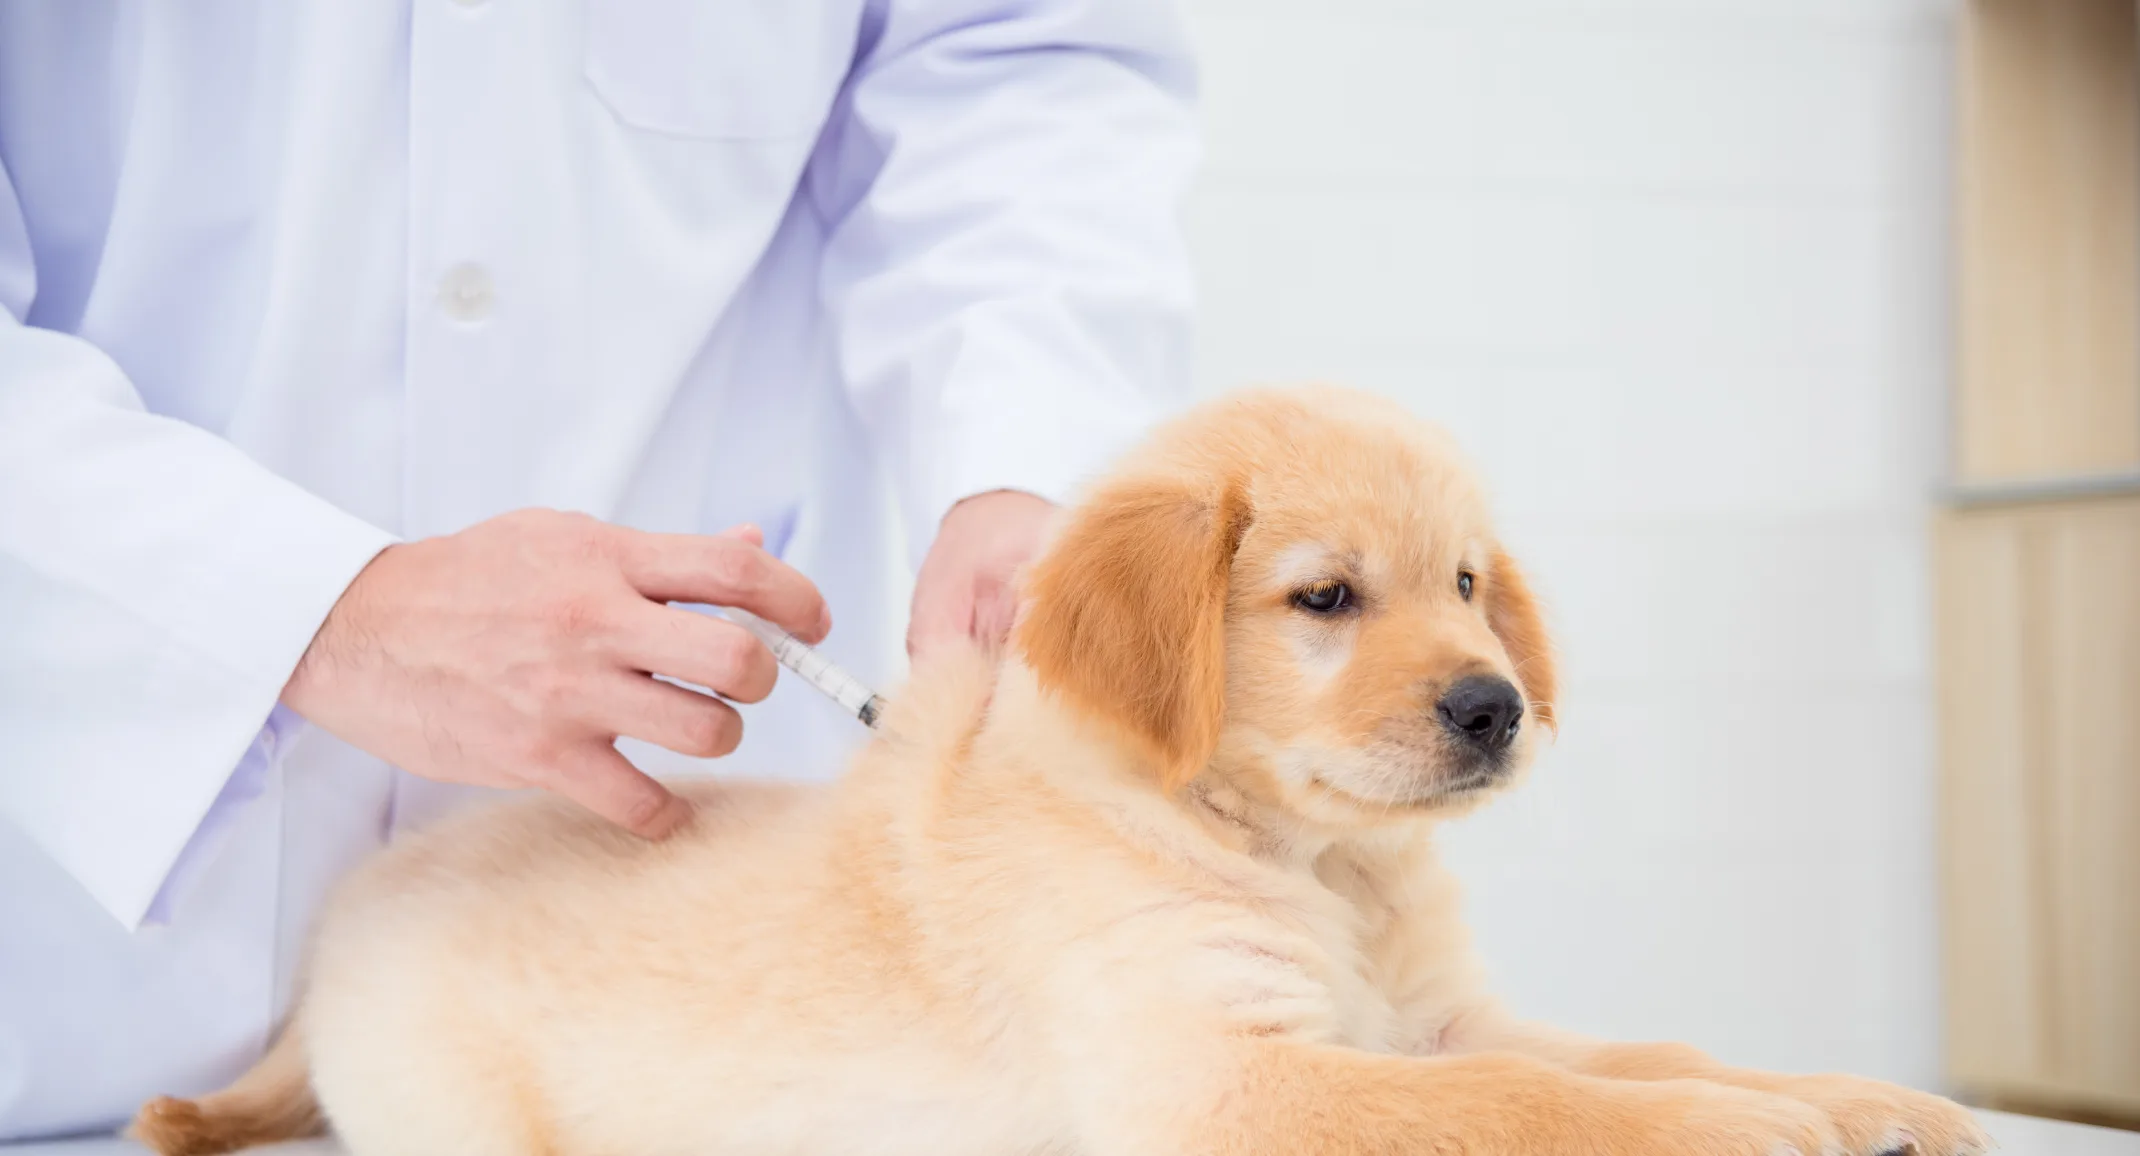 Dog receiving a vaccination